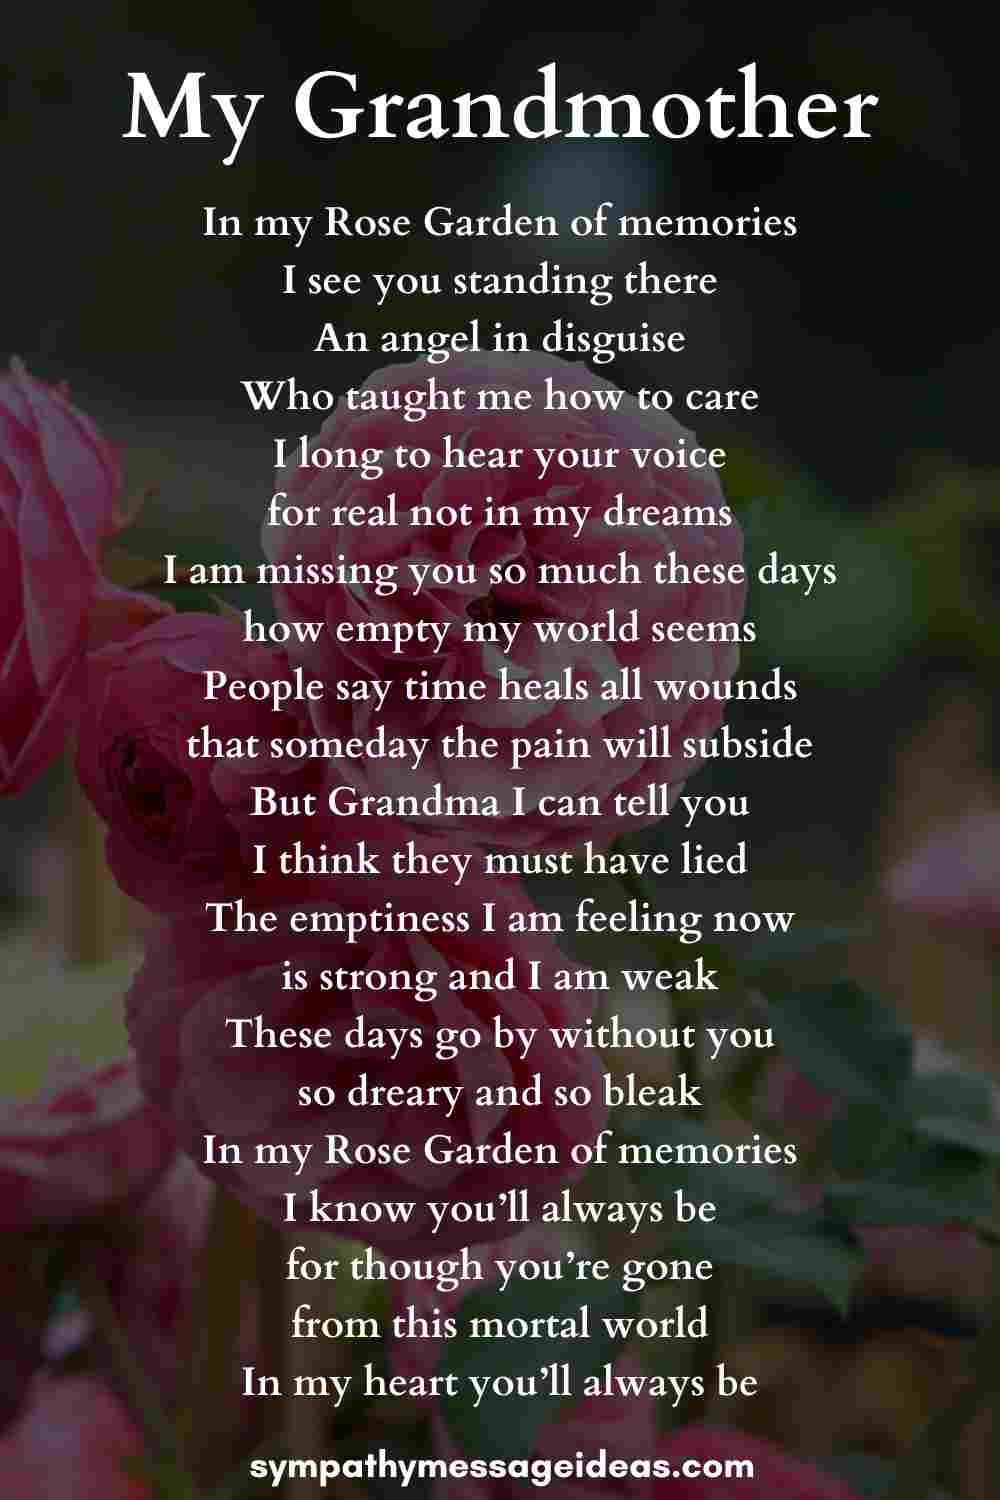 poems-for-obituaries-from-grandchildren-sitedoct